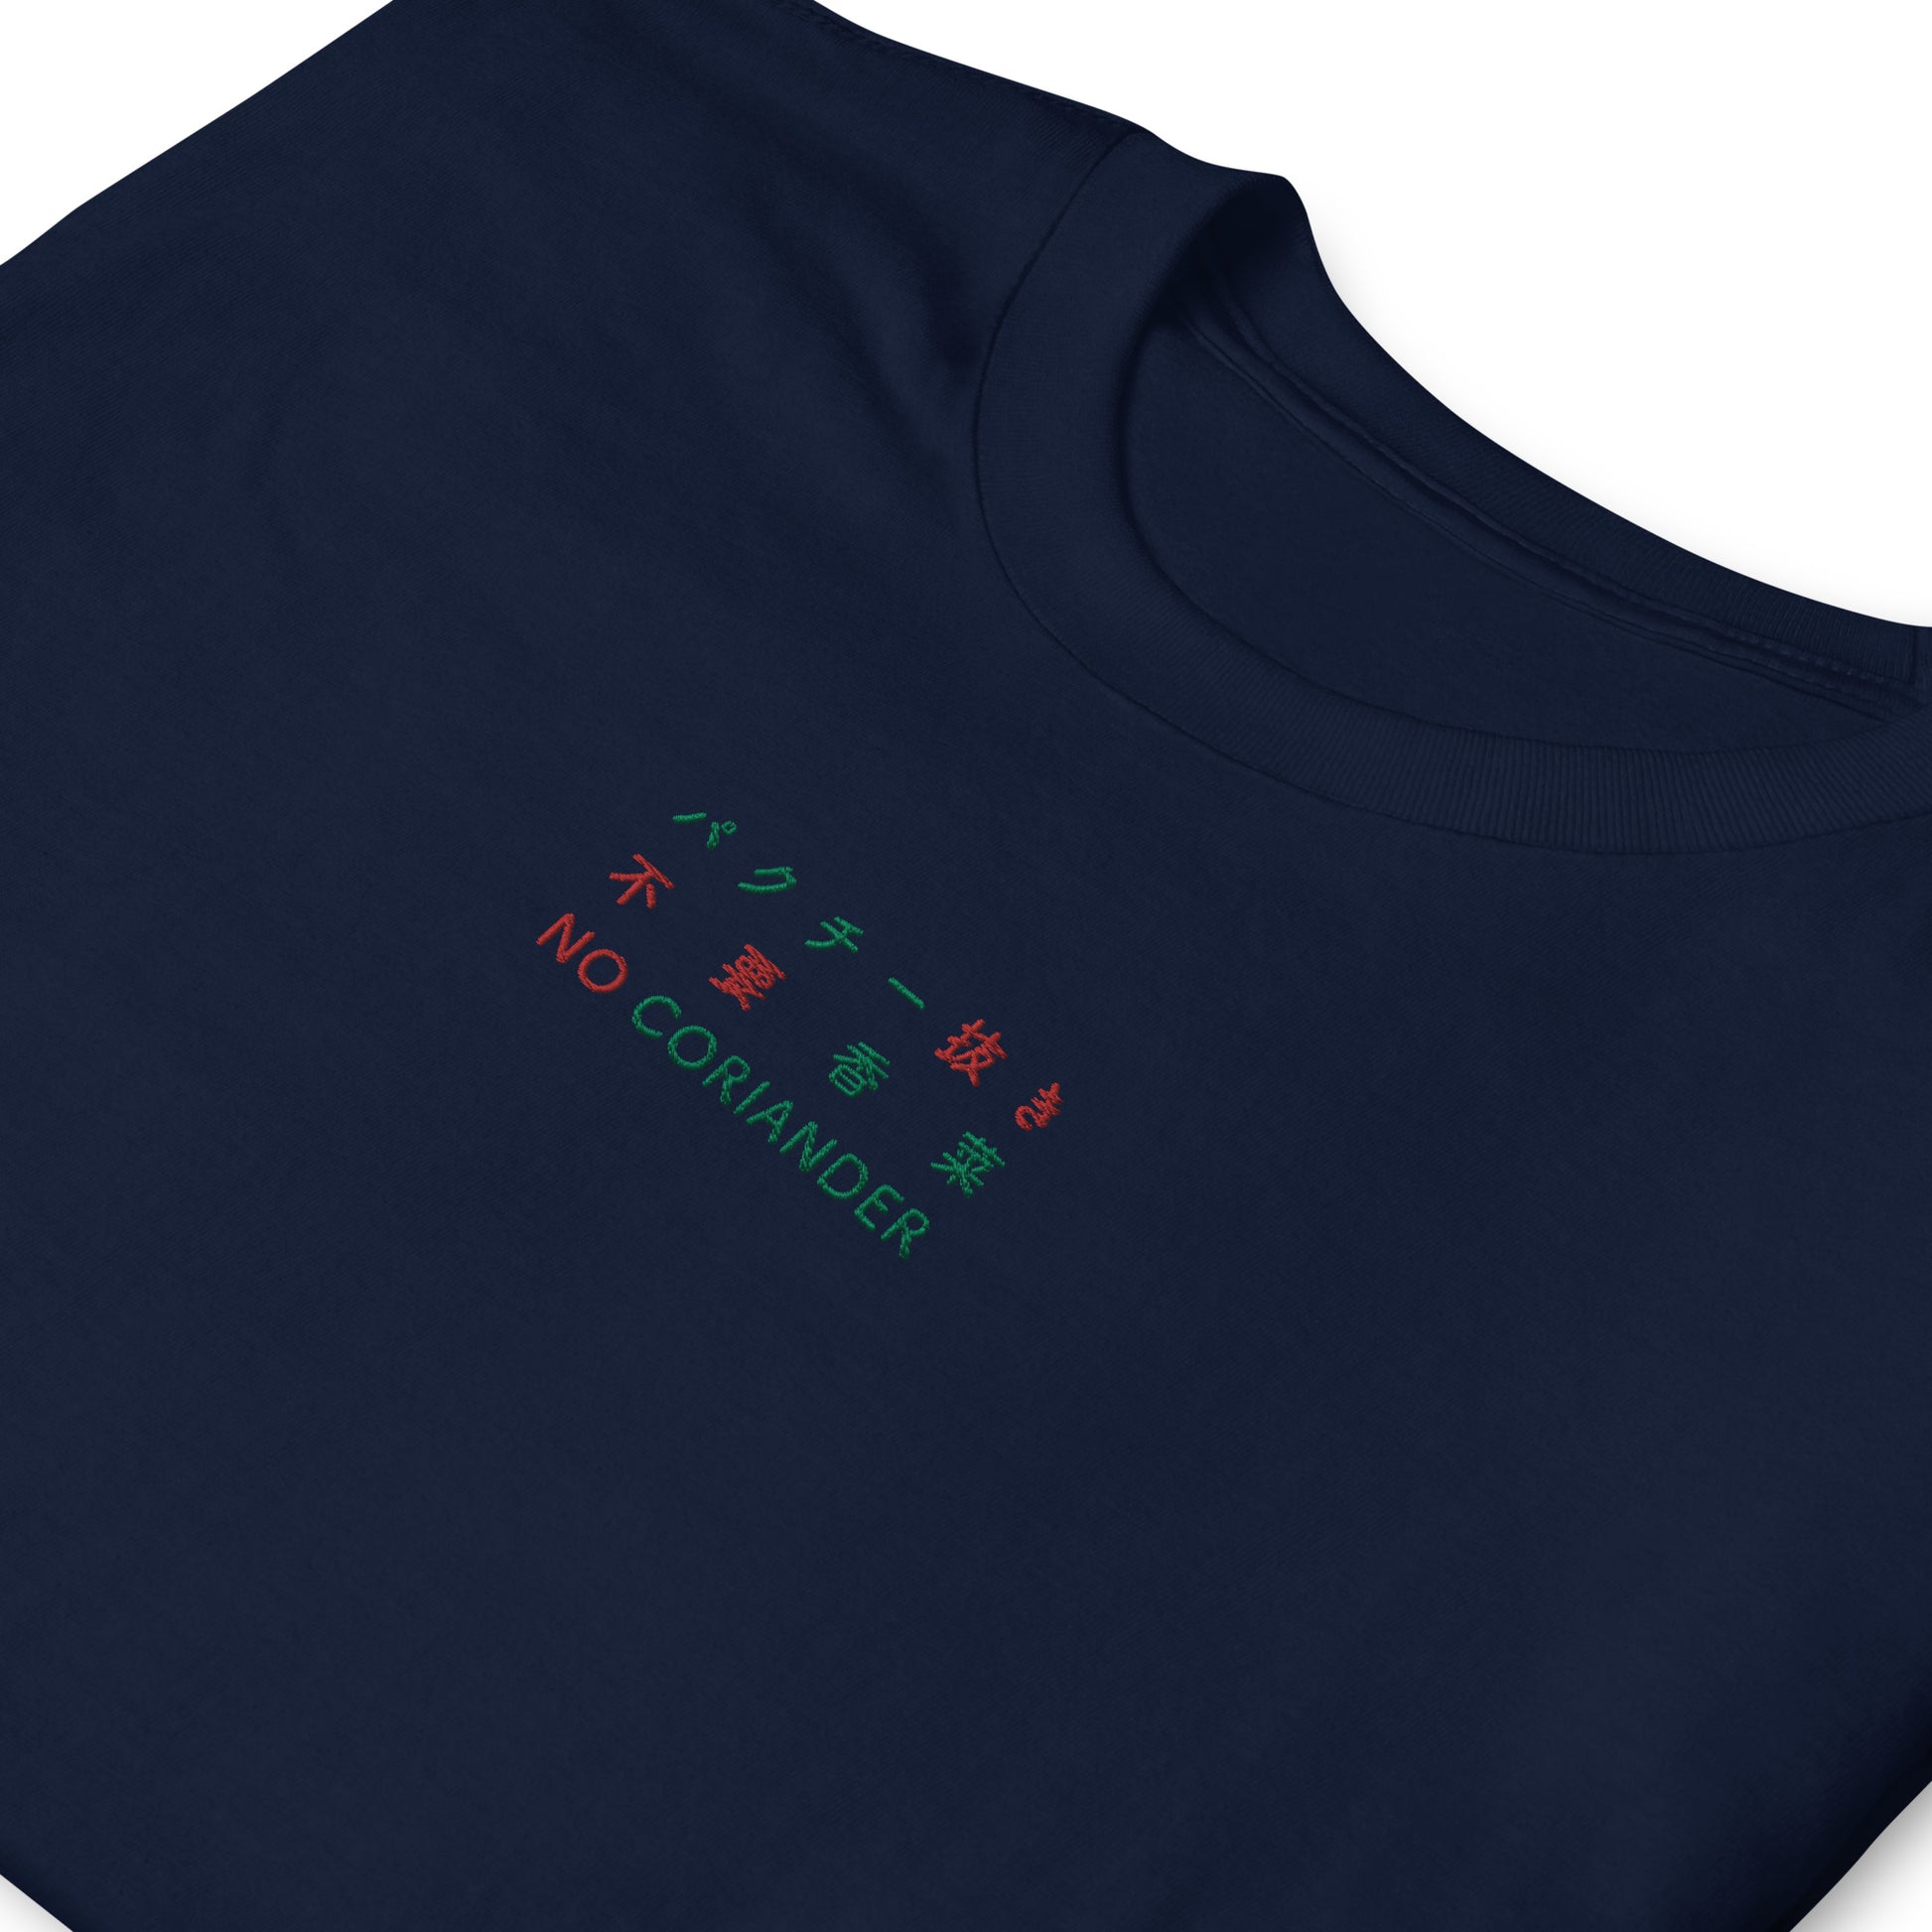 Navy High Quality Tee - Front Design with Red/Green Embroidery "NO CORIANDER" in three languages